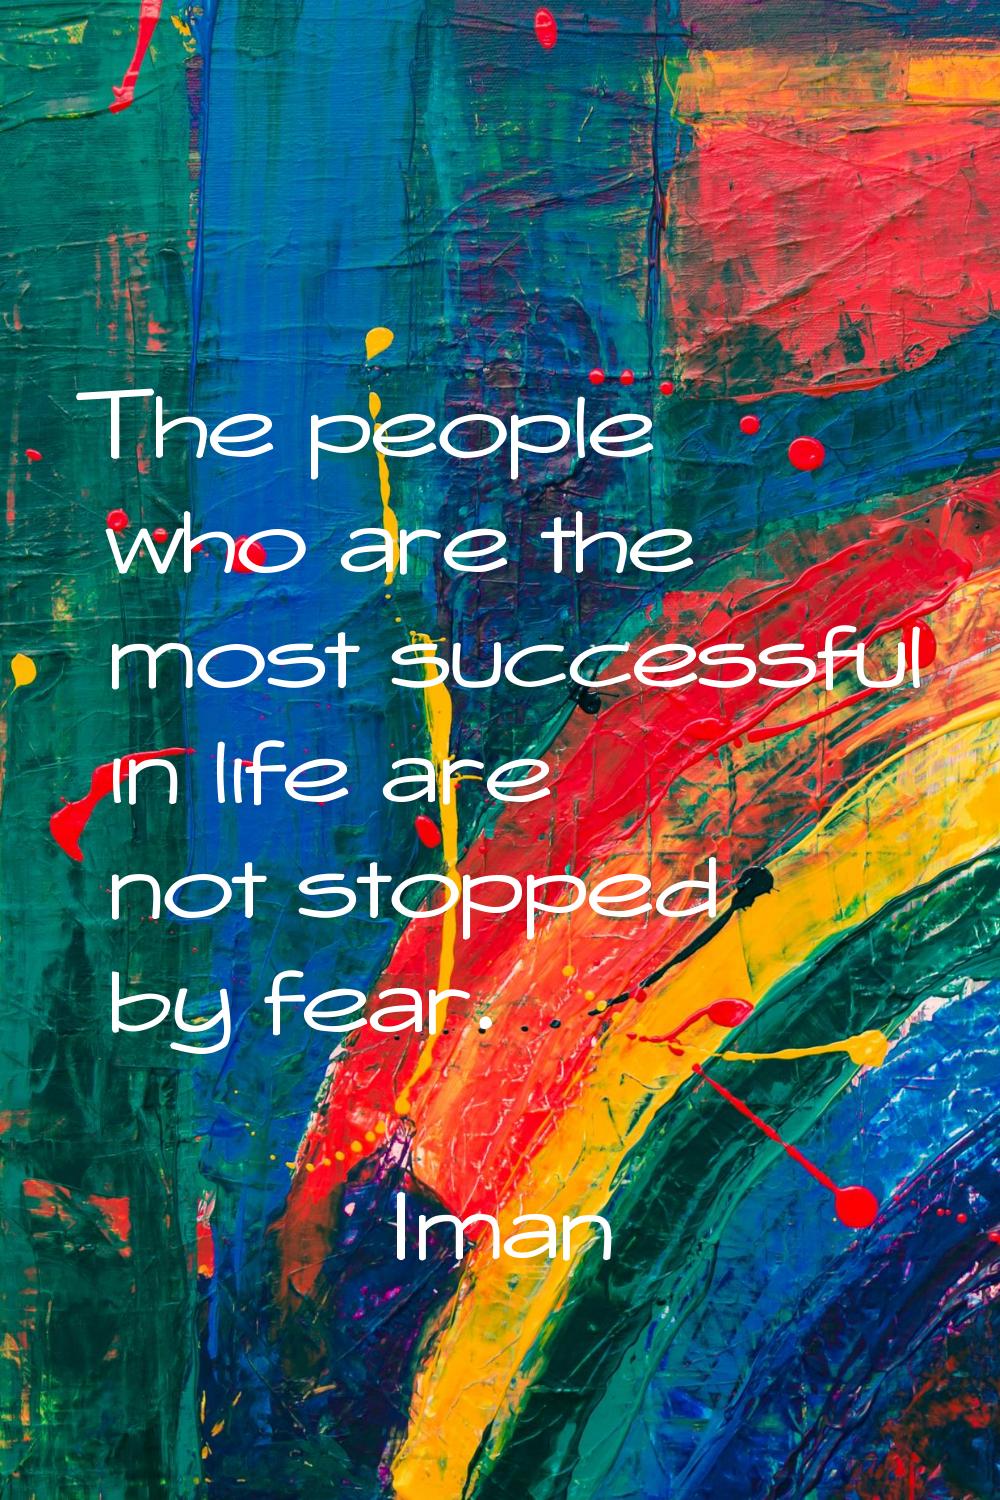 The people who are the most successful in life are not stopped by fear.